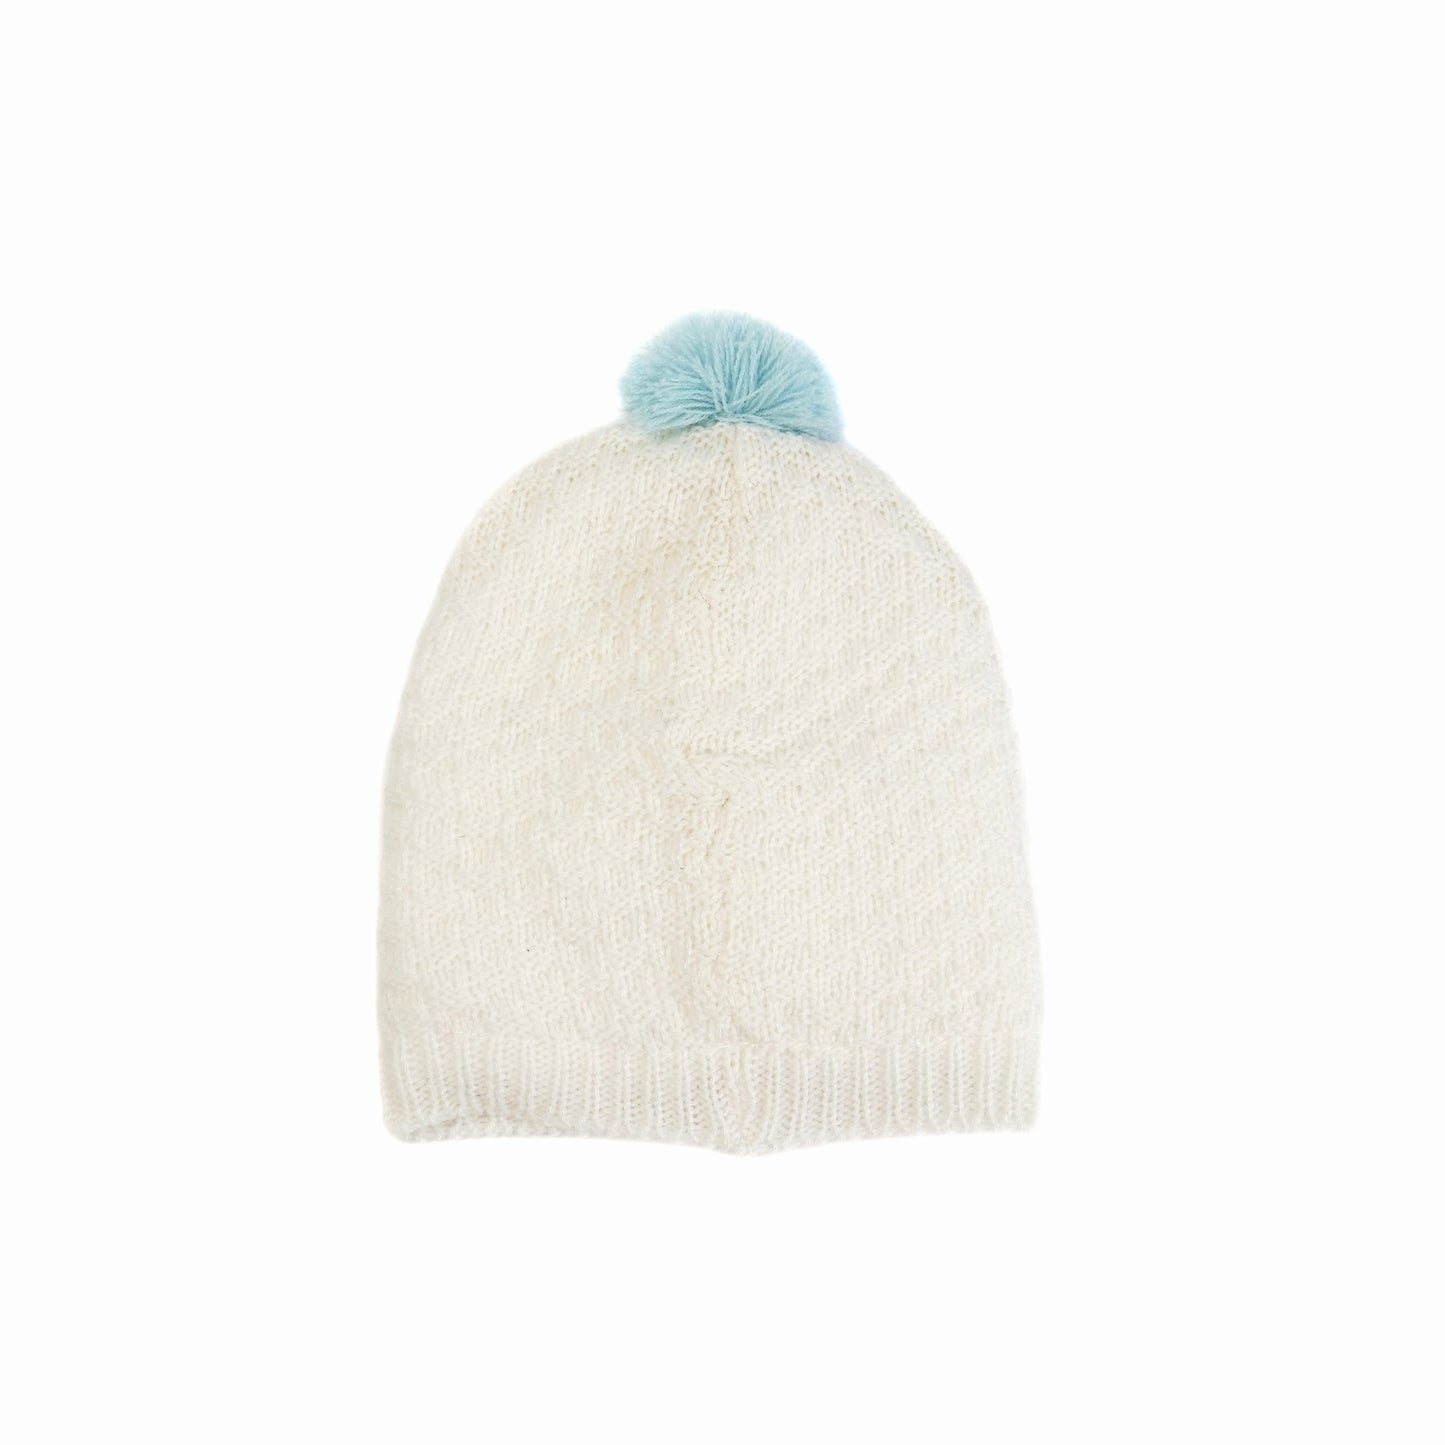 Infant Texture Knit Beanie w/Sherpa Lining